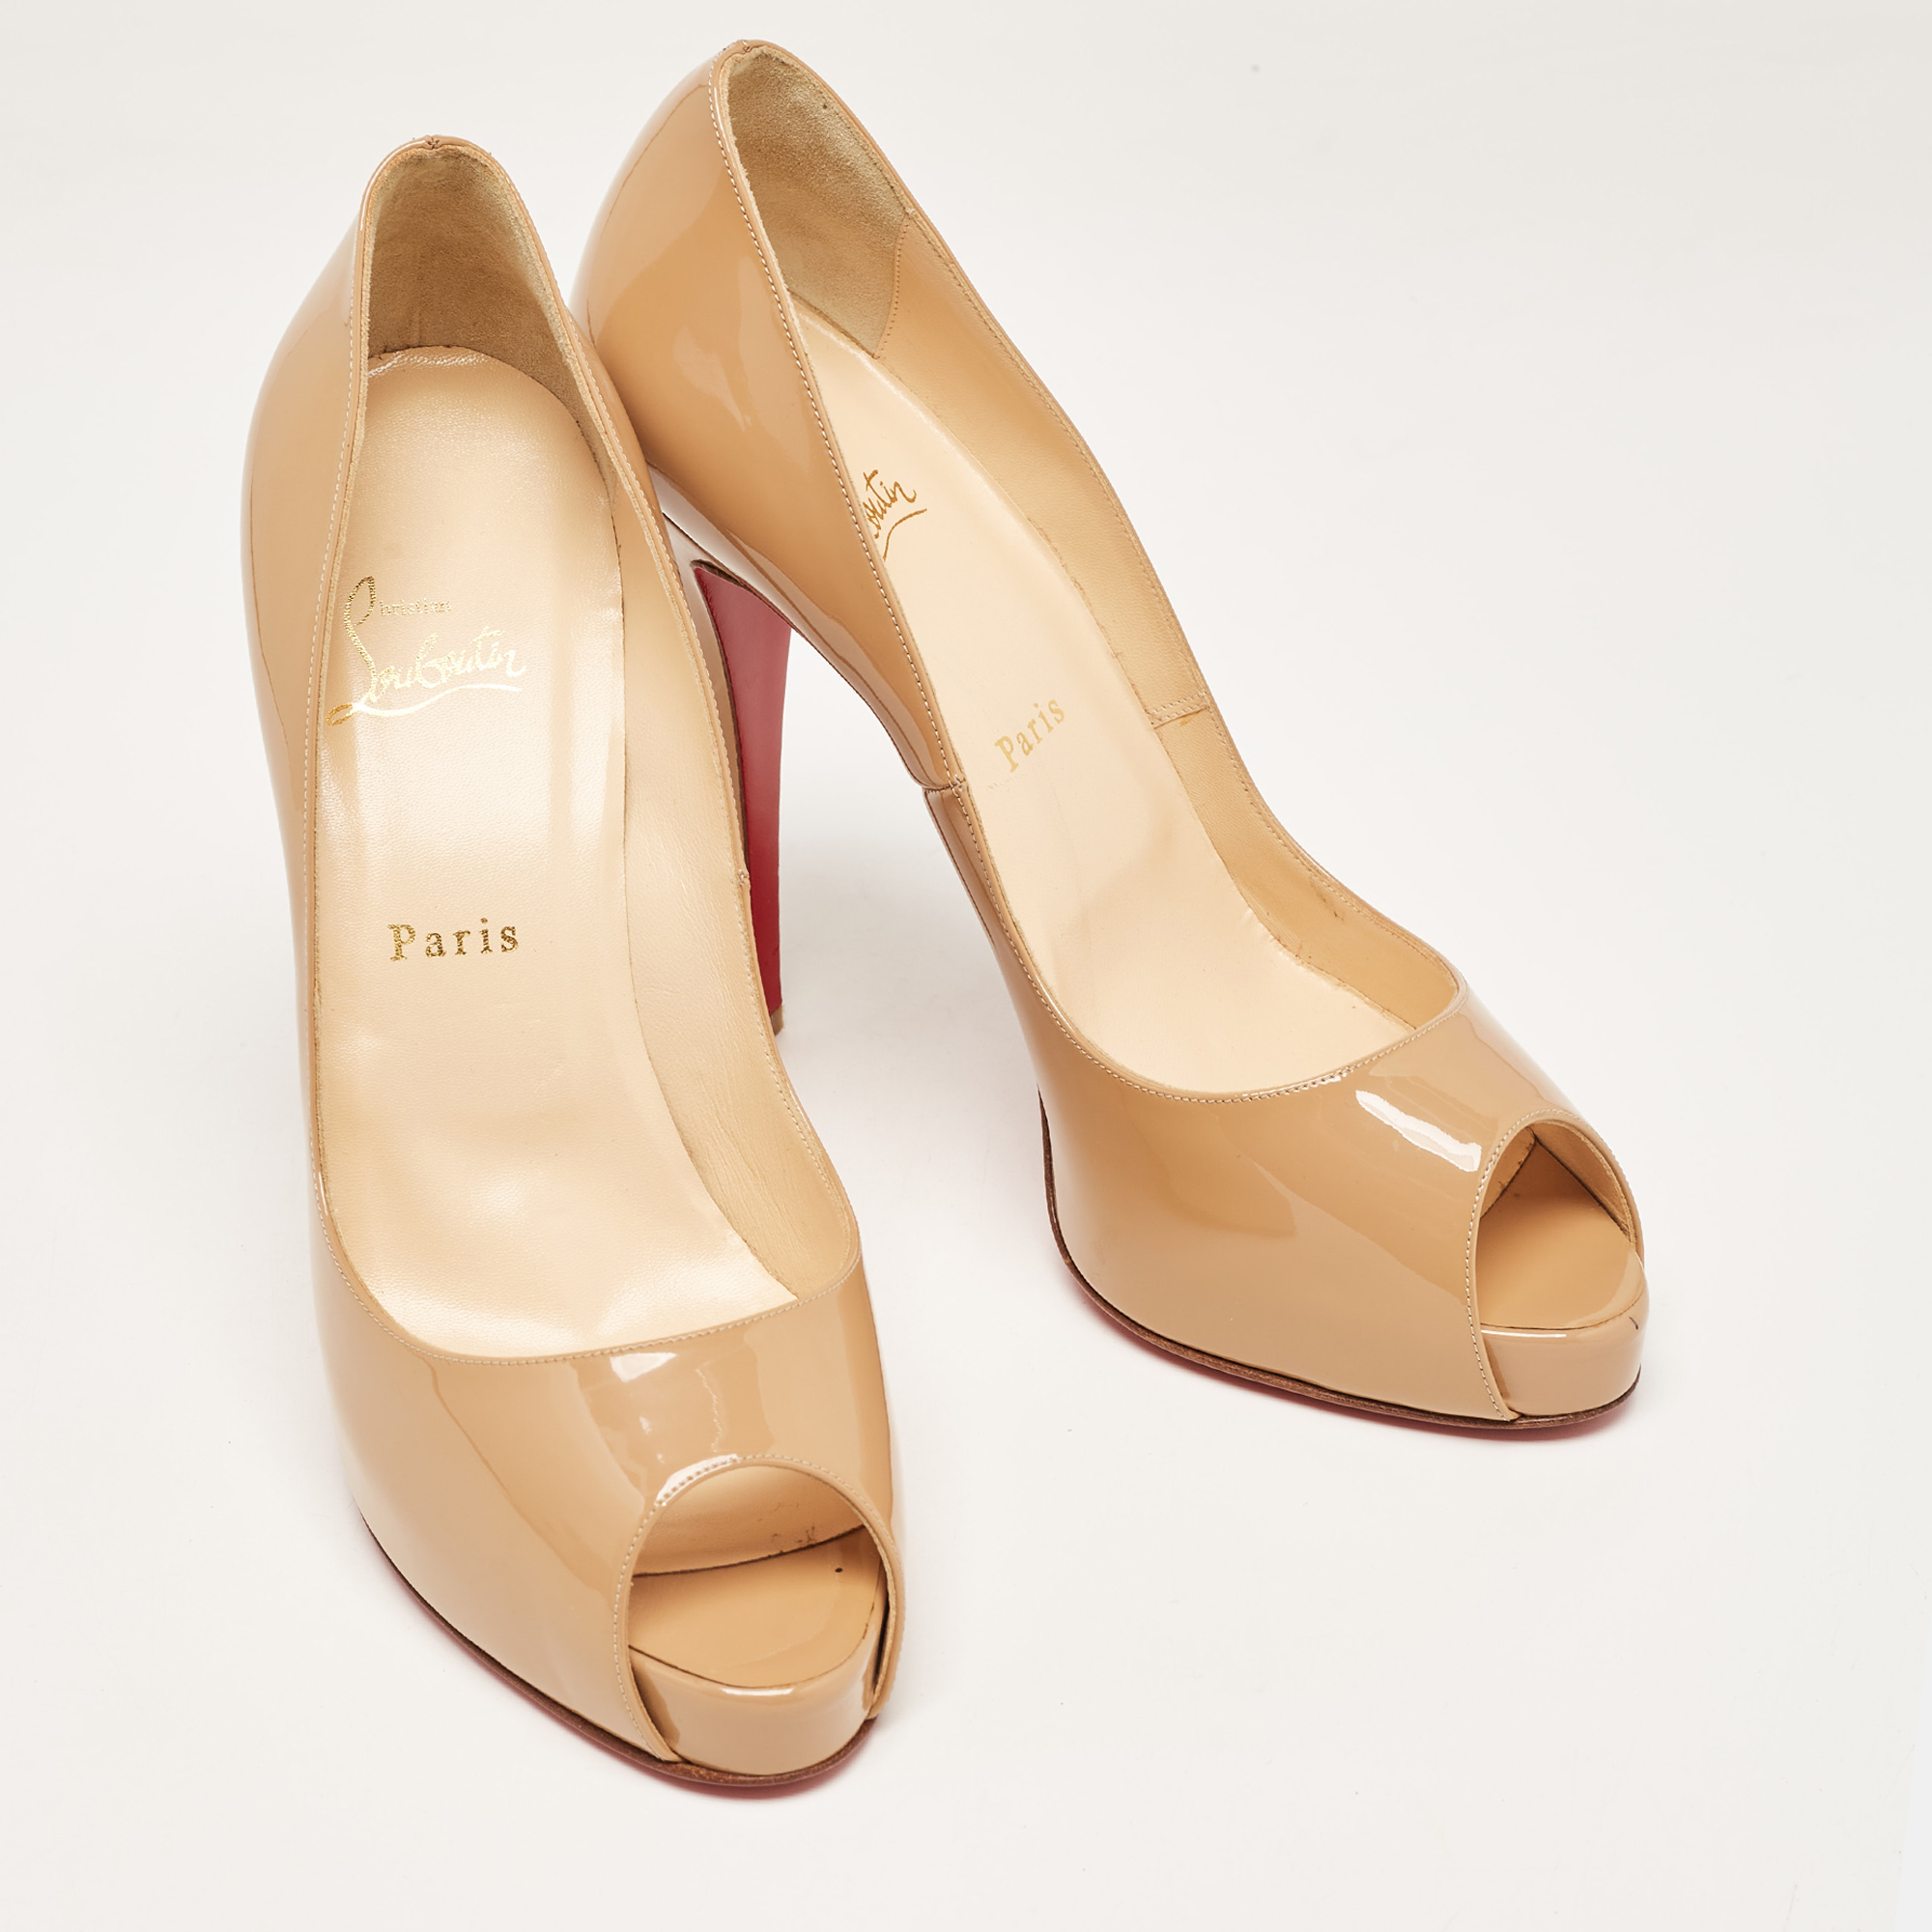 Christian Louboutin Beige Patent Leather Very Prive Pumps Size 41